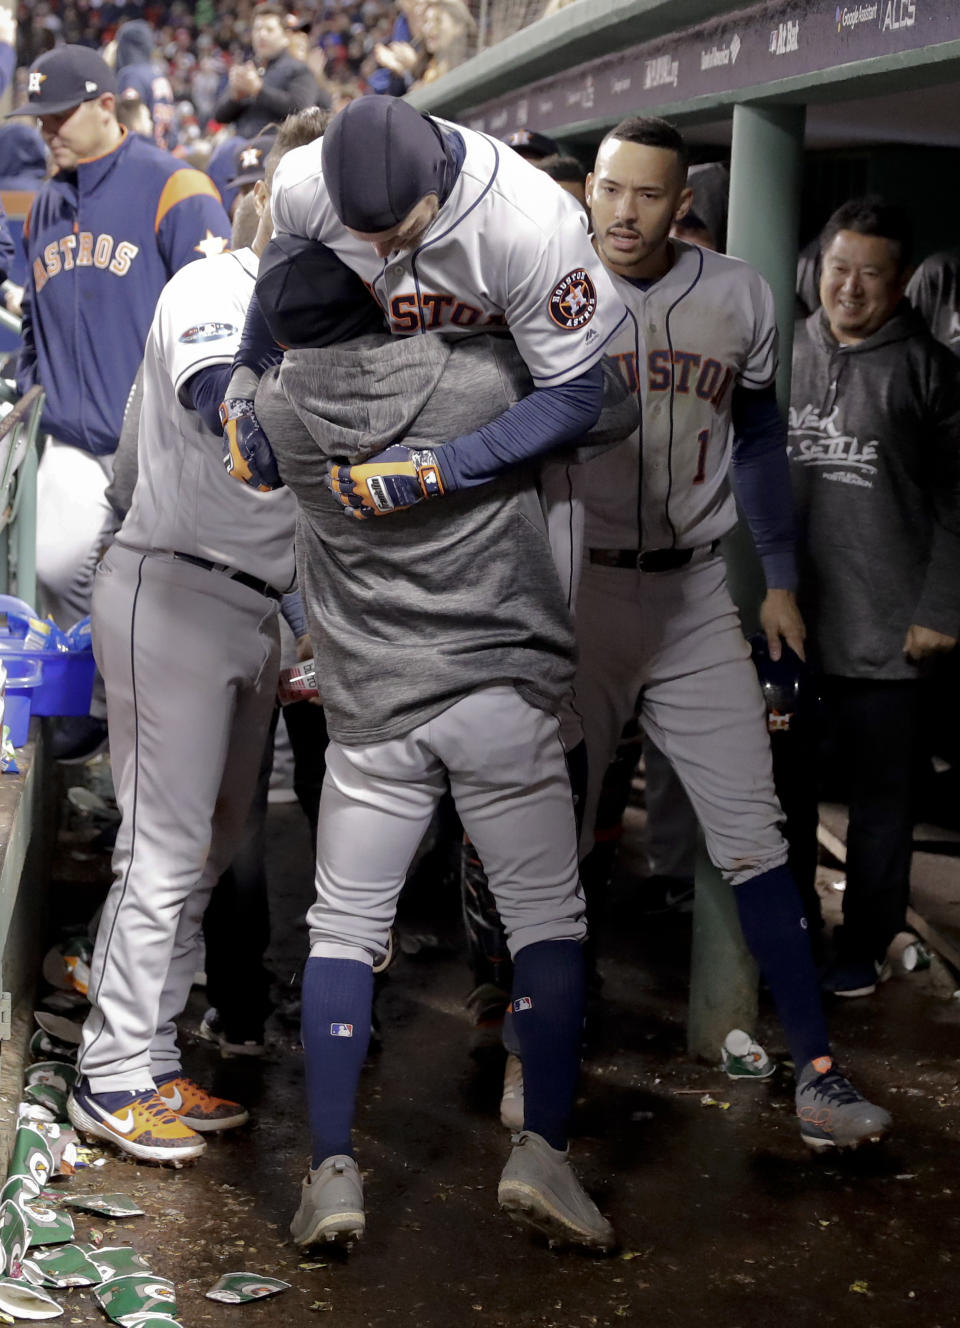 Houston Astros' Josh Reddick celebrates in the dugout after a home run during the ninth inning in Game 1 of a baseball American League Championship Series on Saturday, Oct. 13, 2018, in Boston. (AP Photo/David J. Phillip)